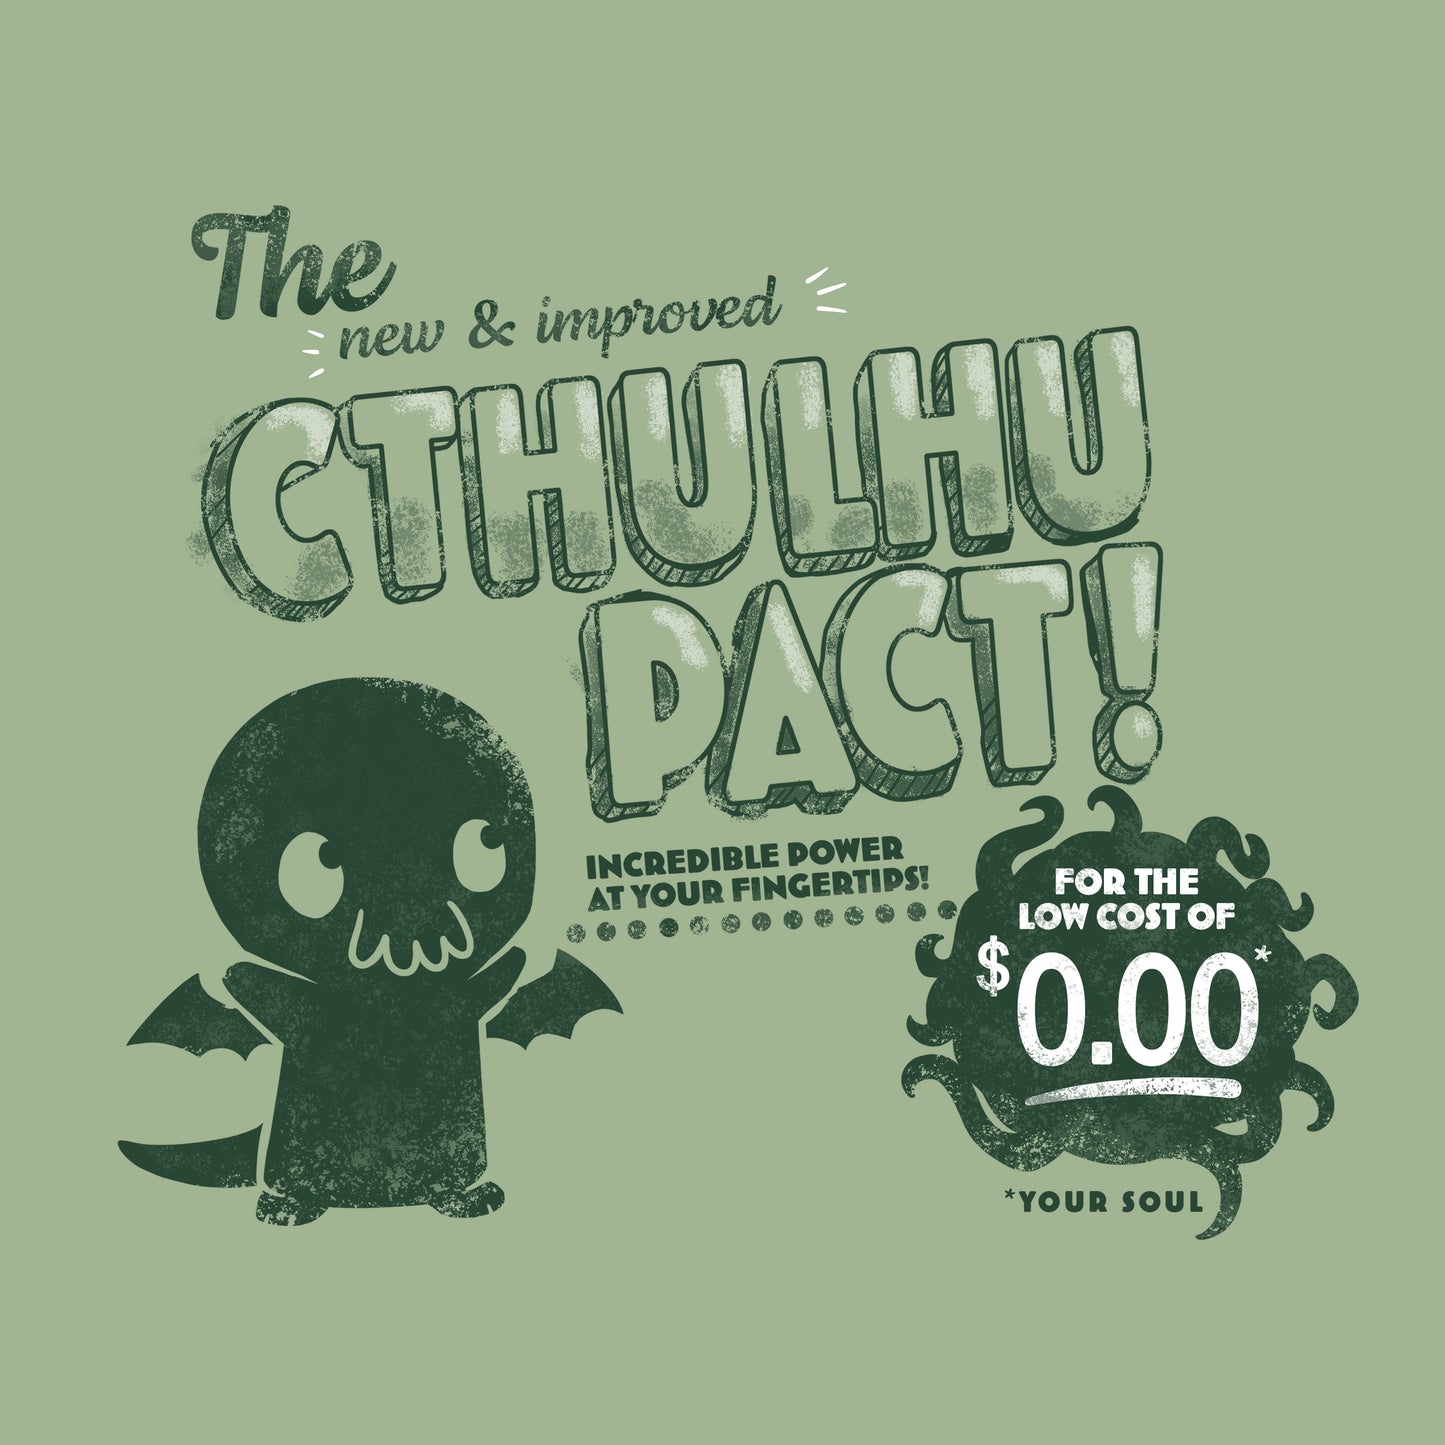 Promotional graphic for the "New & Improved Cthulhu Pact T-shirt" by TeeTurtle illustrating a stylized depiction of Cthulhu with text offering "incredible power" in exchange for one's soul.